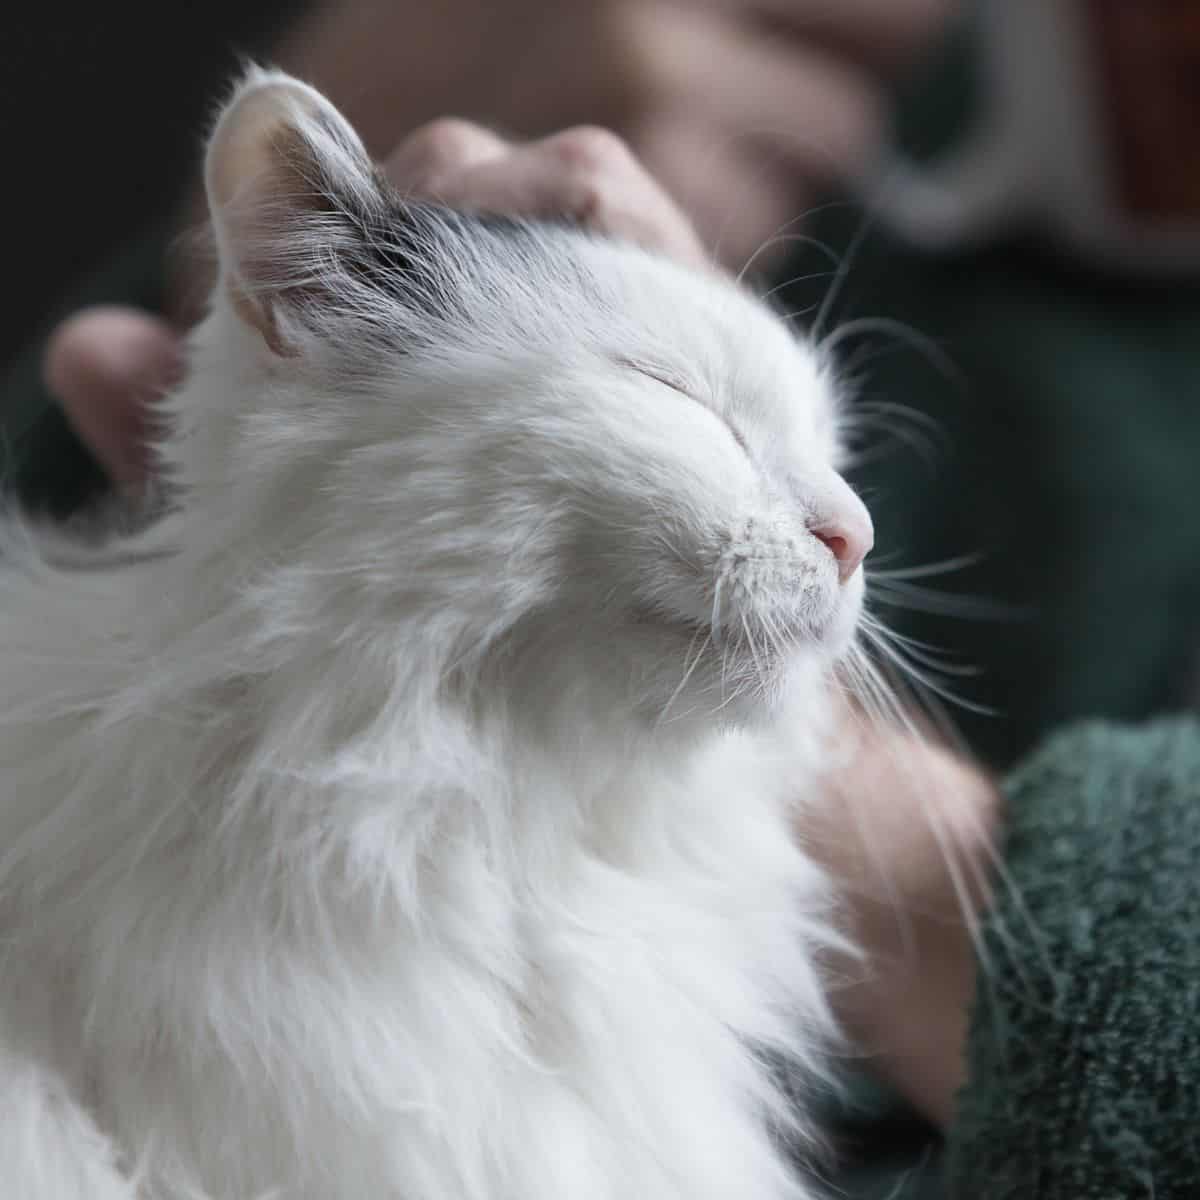 owner petting white cat